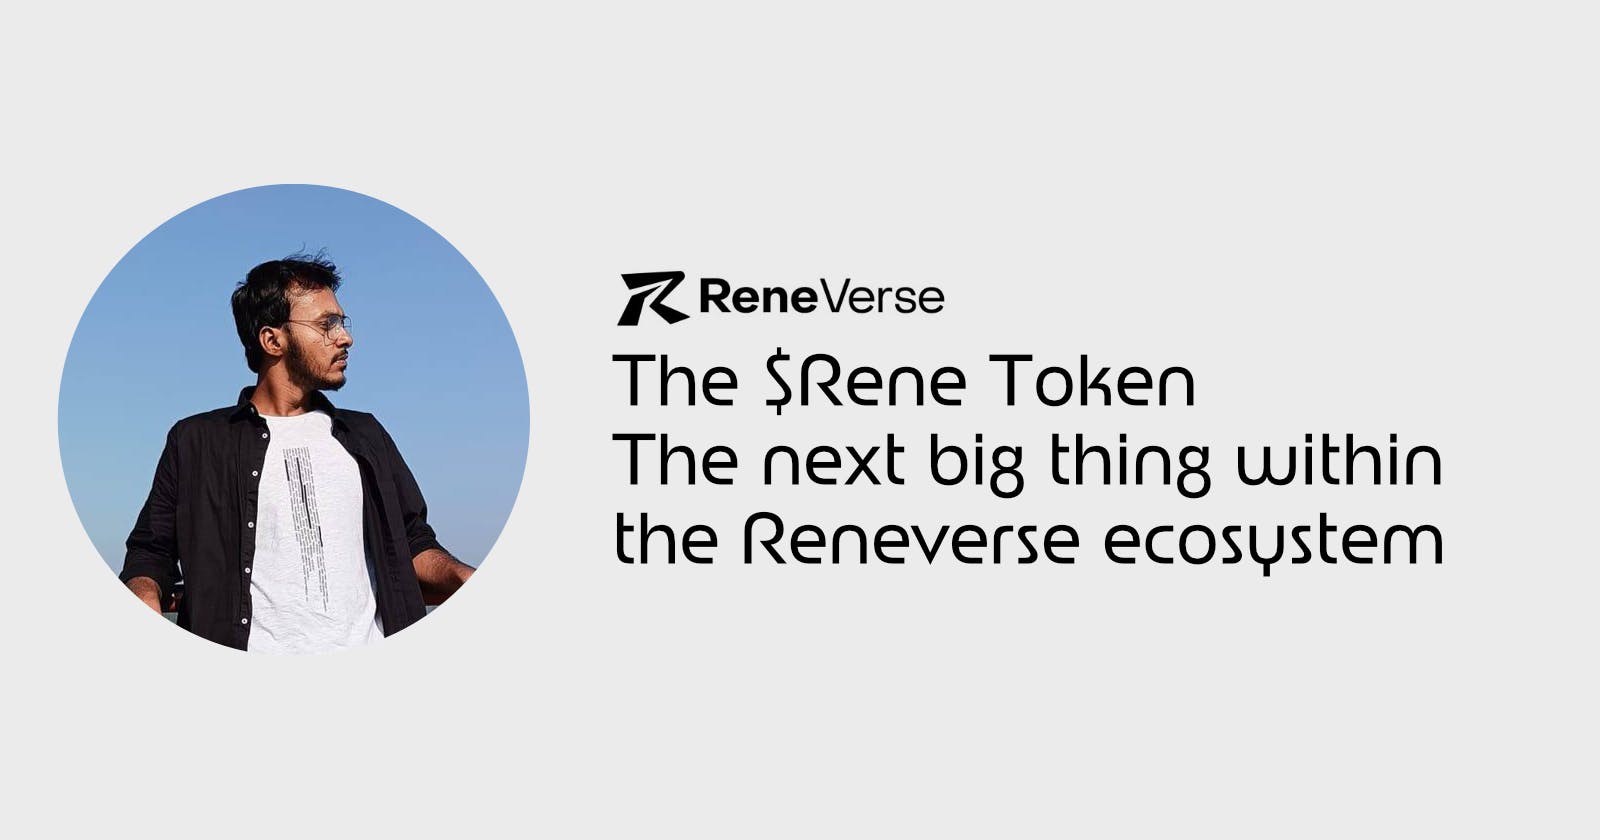 The next big thing at Reneverse: The $Rene Token